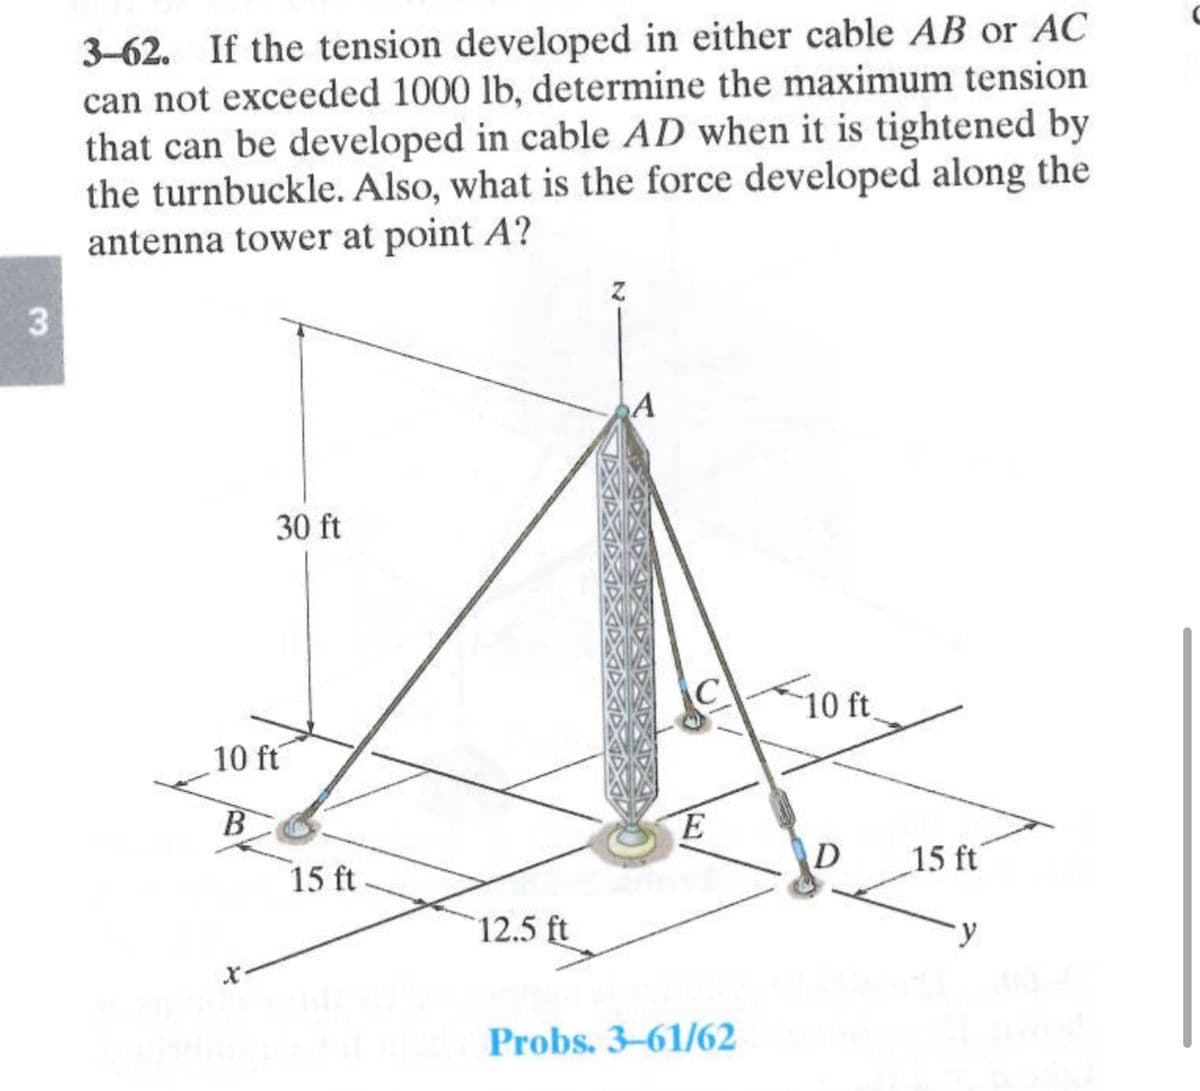 3
3-62. If the tension developed in either cable AB or AC
can not exceeded 1000 lb, determine the maximum tension
that can be developed in cable AD when it is tightened by
the turnbuckle. Also, what is the force developed along the
antenna tower at point A?
30 ft
10 ft
B
15 ft
12.5 ft
A
C
E
Probs. 3-61/62
10 ft.
D
15 ft
y